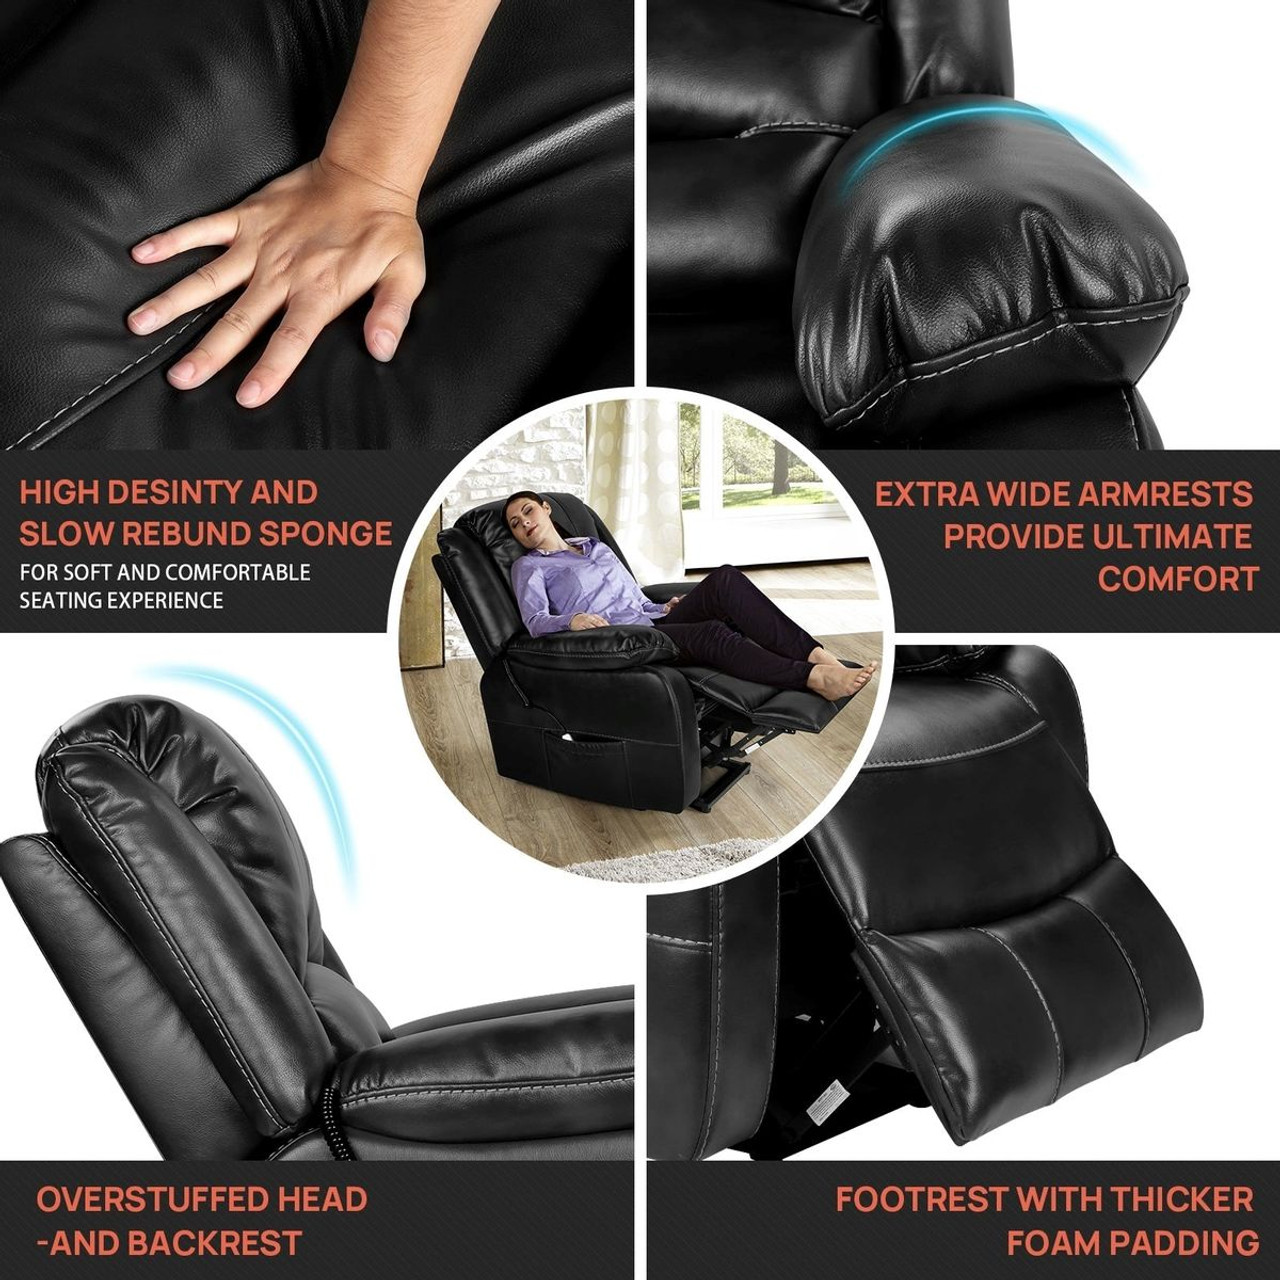 TACKspace® Power Lift Recliner Chair with Silent Motor & USB Charging Port product image